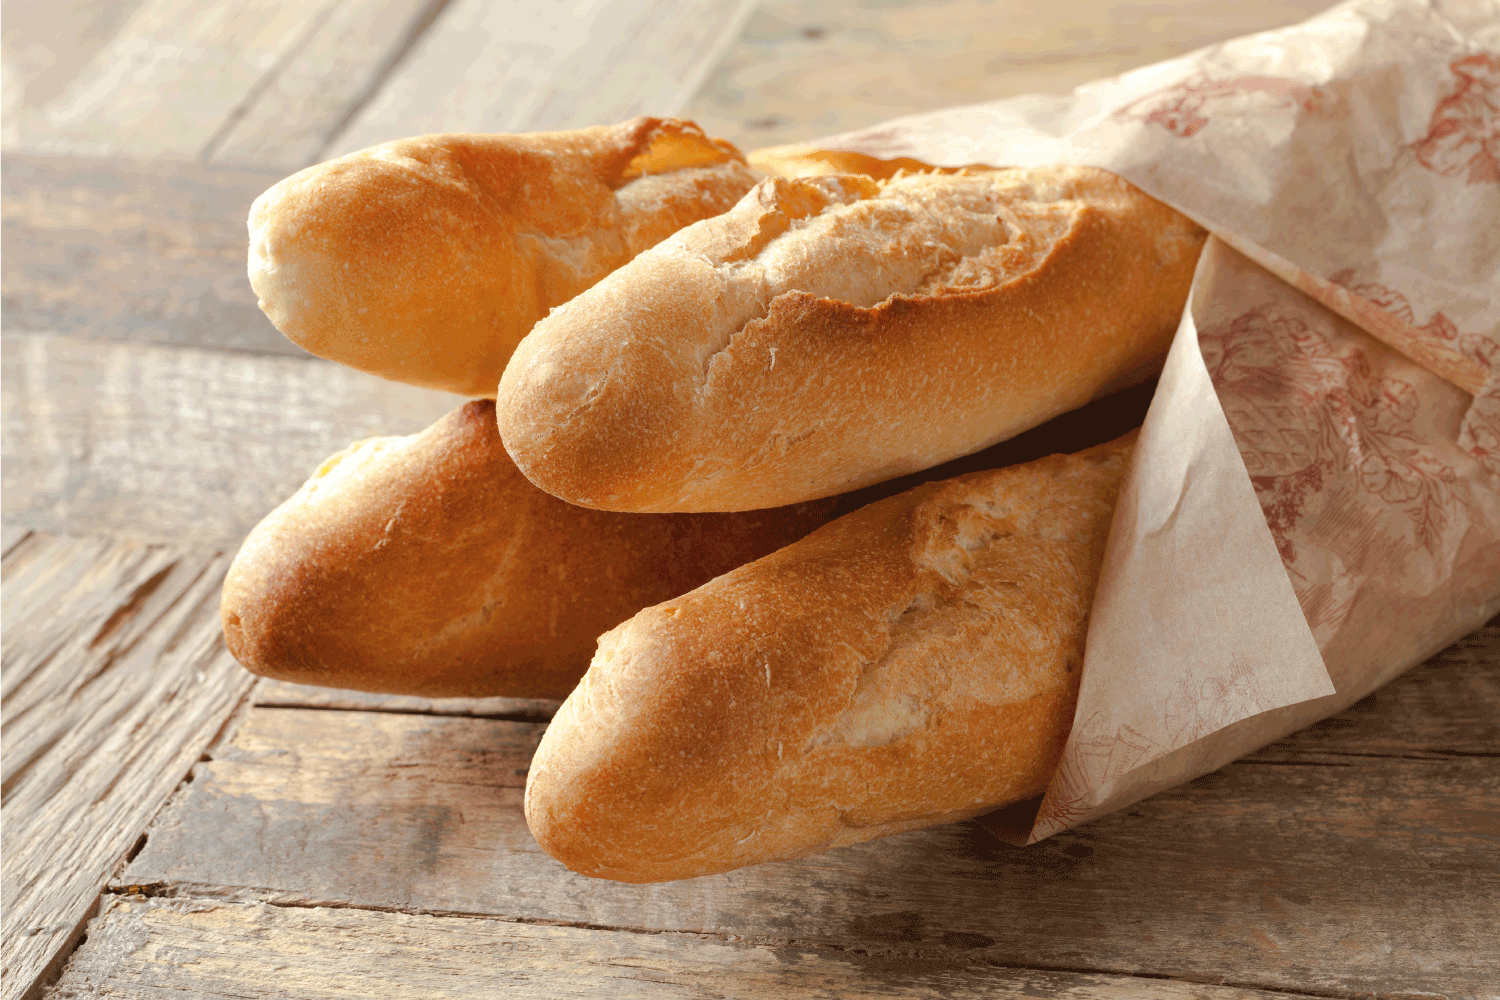 French baguettes wrapped in paper on top of a wooden table